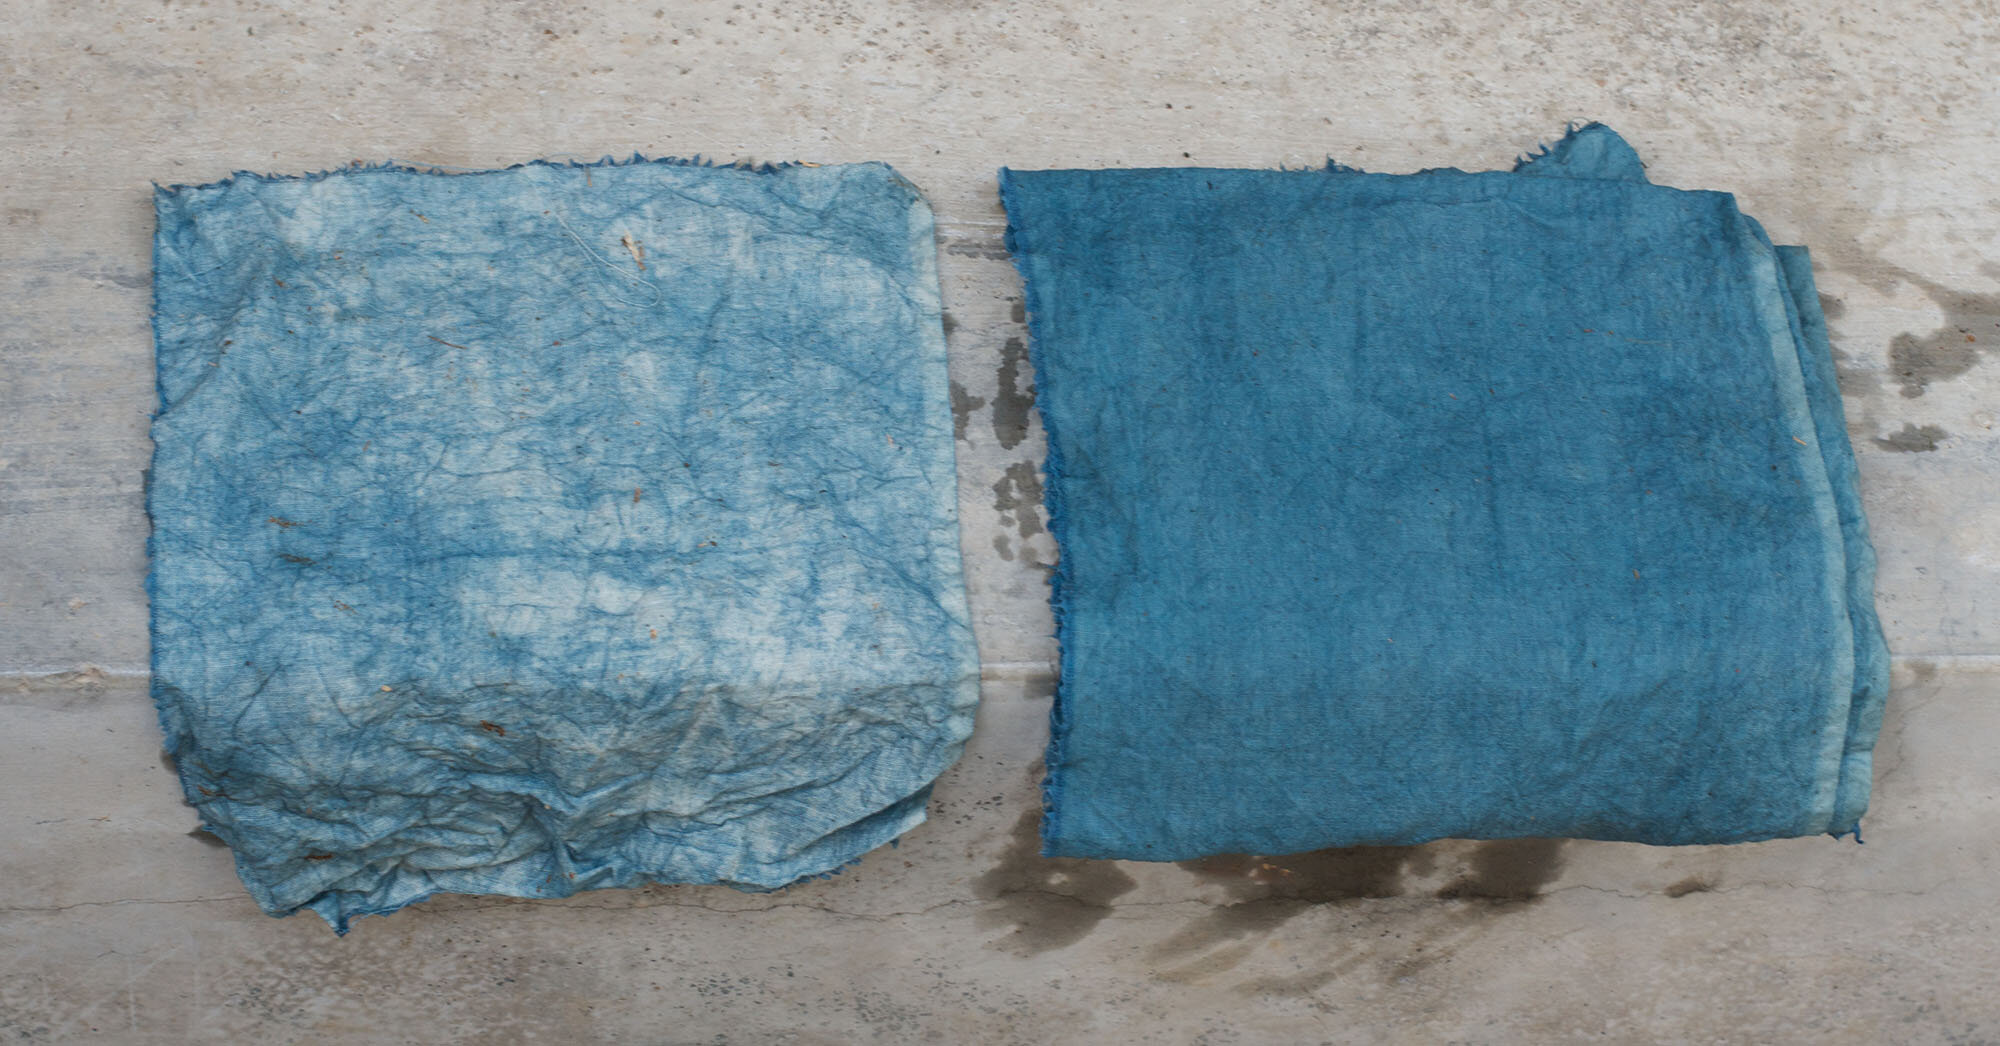 How to Make Natural Blue Dye From Plants